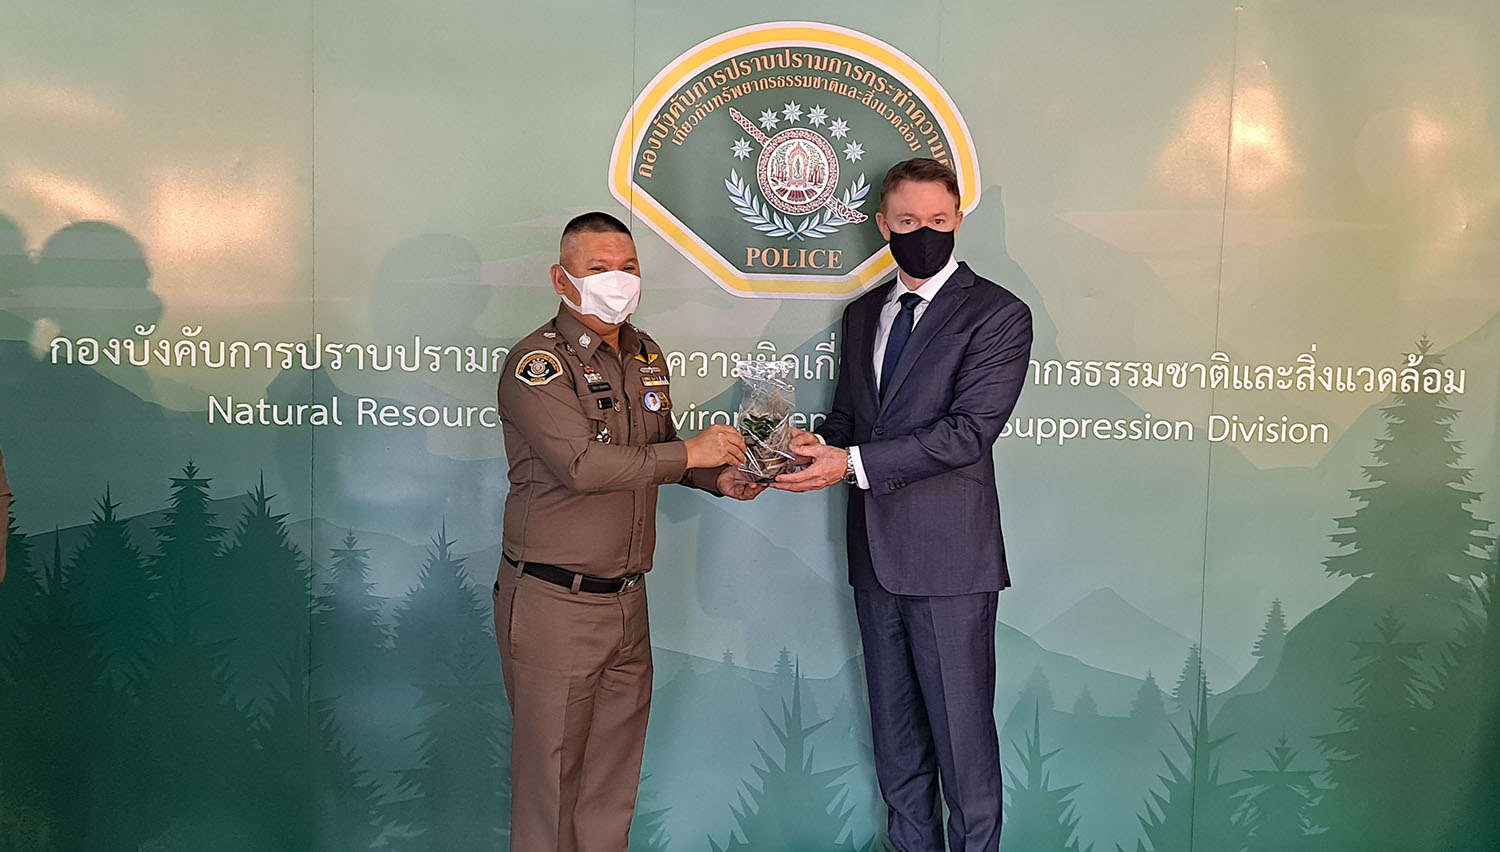 Regional Representative for Southeast Asia is the Pacific Jeremy Douglas is welcomed by NED Commander Pol. Maj. Gen. Pitak Utaitham. The seeding is an importants symbol of prosperity, a particularly important gesture for the NED on World Wildlife Day.